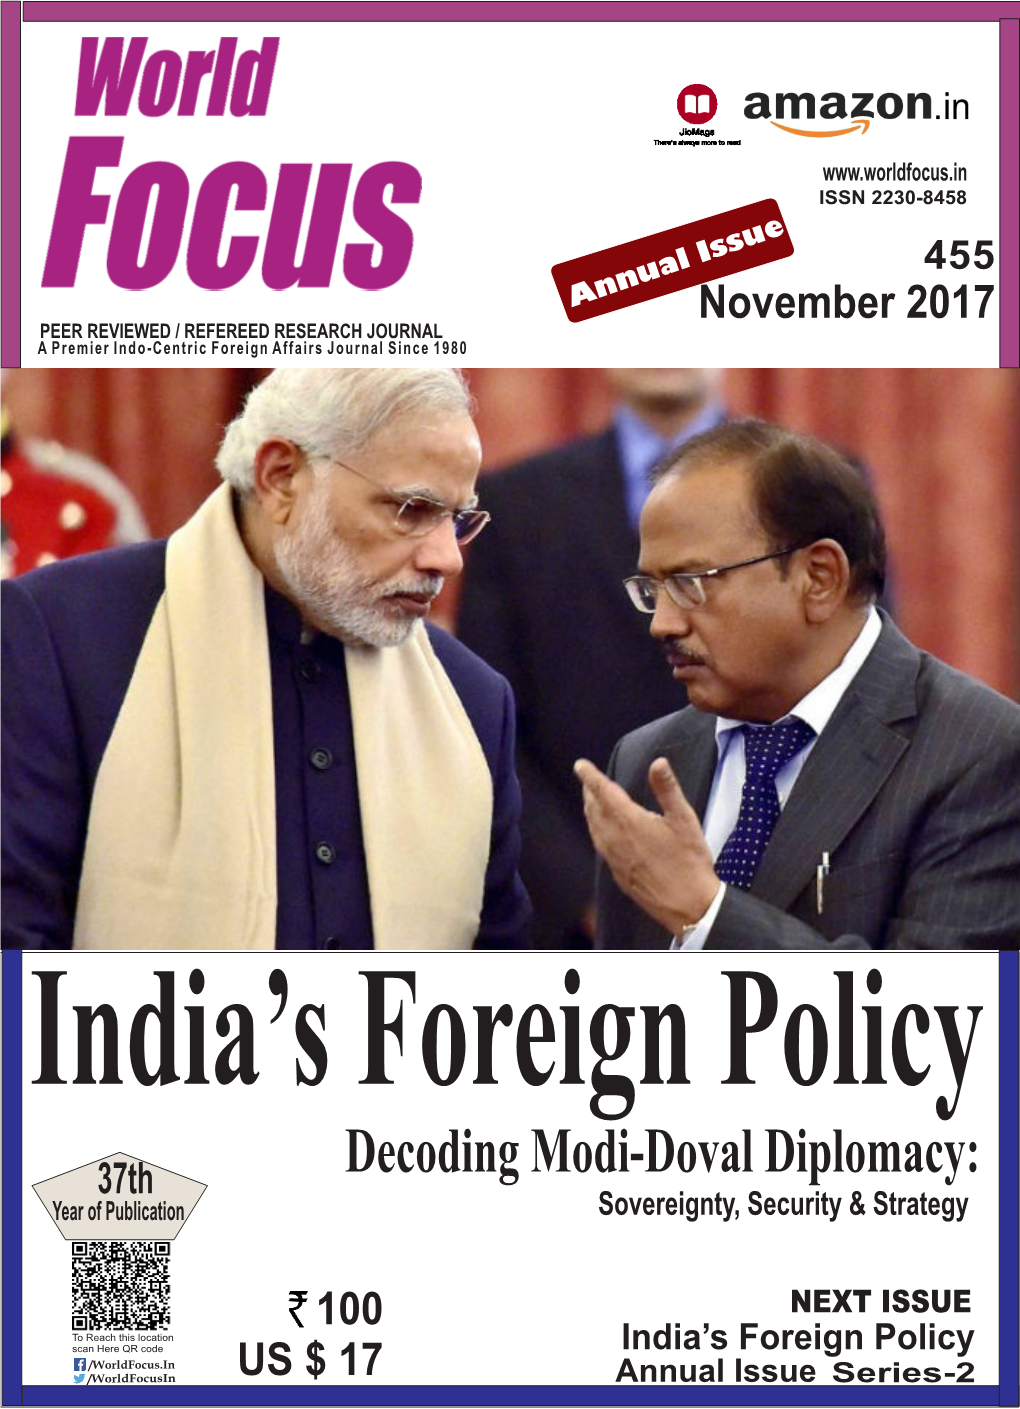 Decoding Modi-Doval Diplomacy: Year of Publication Sovereignty, Security & Strategy